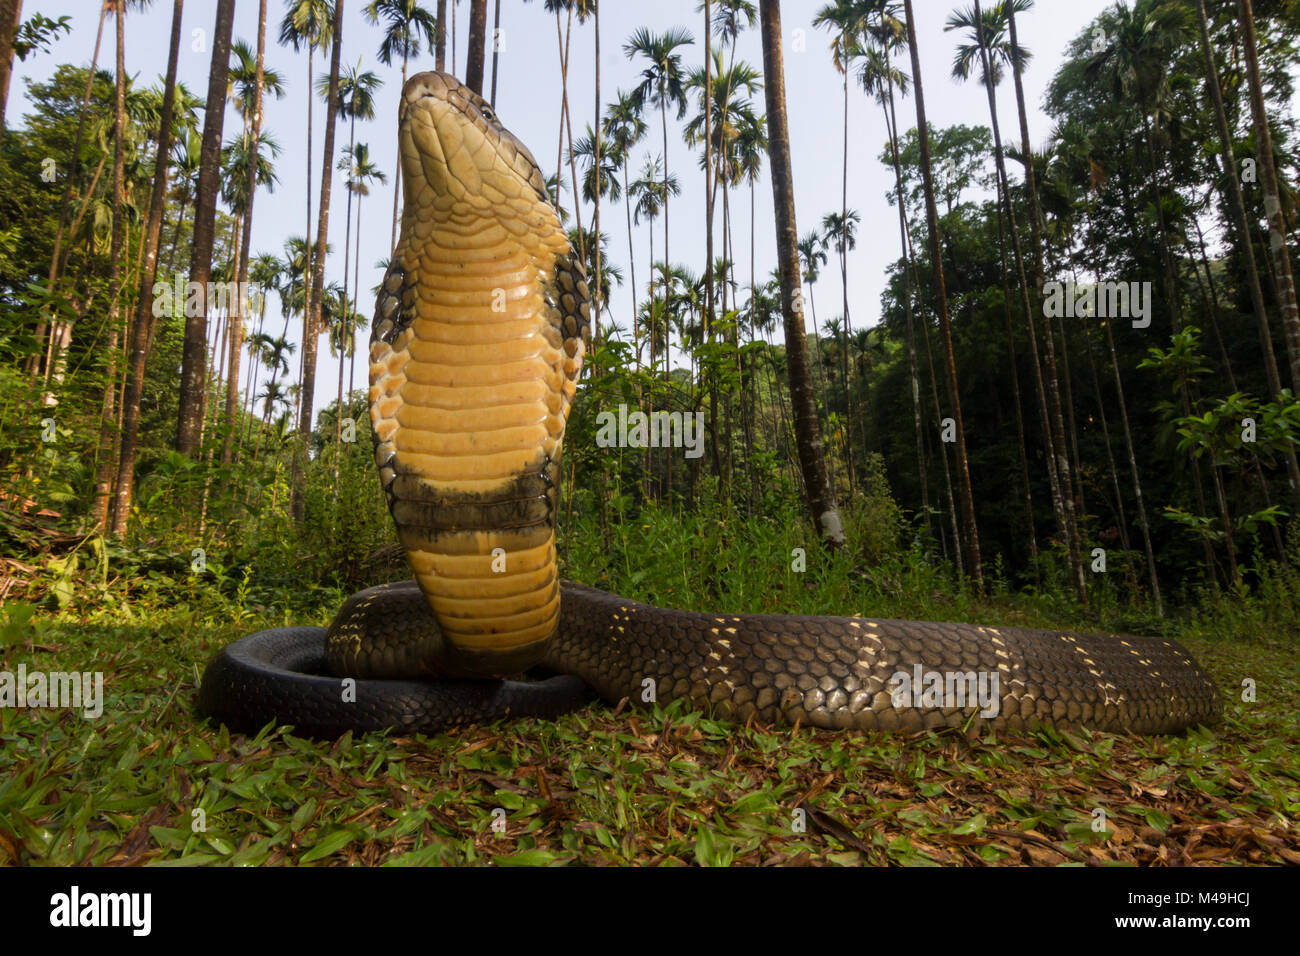 King cobra (Ophiophagus hannah), low wide angle perspective  Agumbe, Karnataka, Western Ghats, India. Vulnerable species Stock Photo